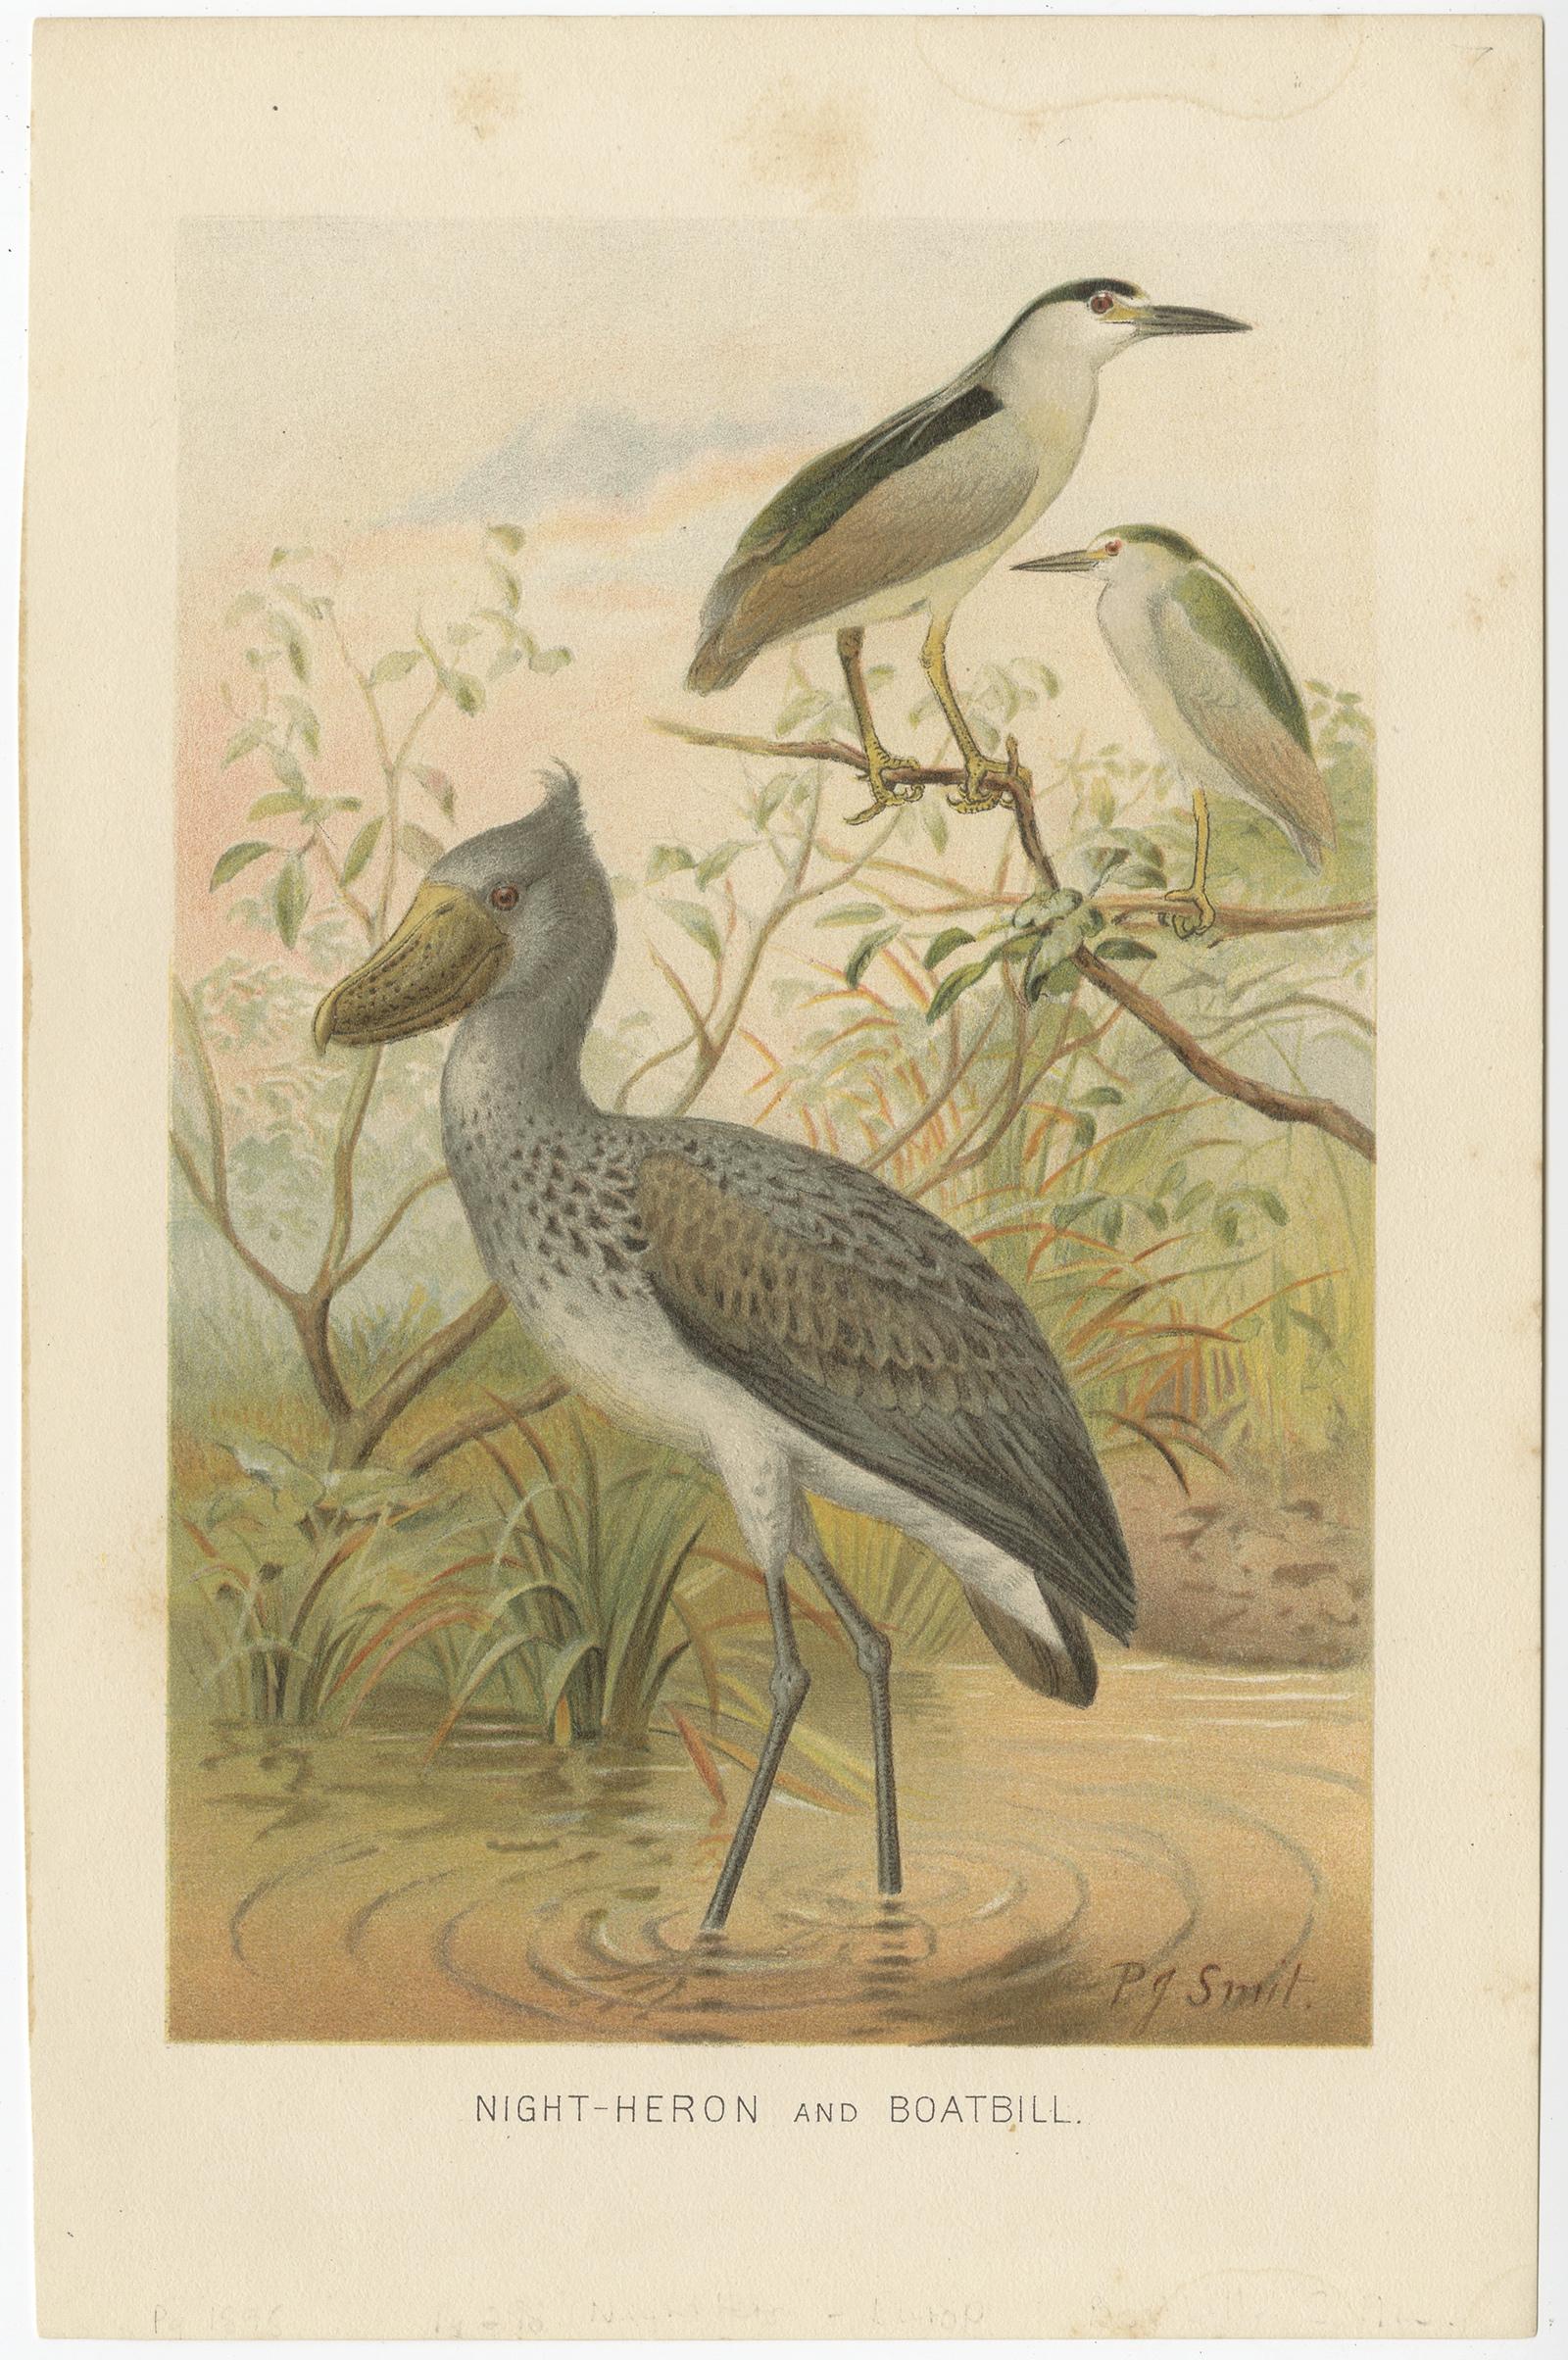 Antique bird print titled 'Night-Heron and Boatbill'. 

Chromolithograph depicting a night-heron and boatbill. This print originates from 'The Royal Natural History' by R. Lydekker.

Artists and Engravers: Richard Lydekker (25 July 1849 – 16